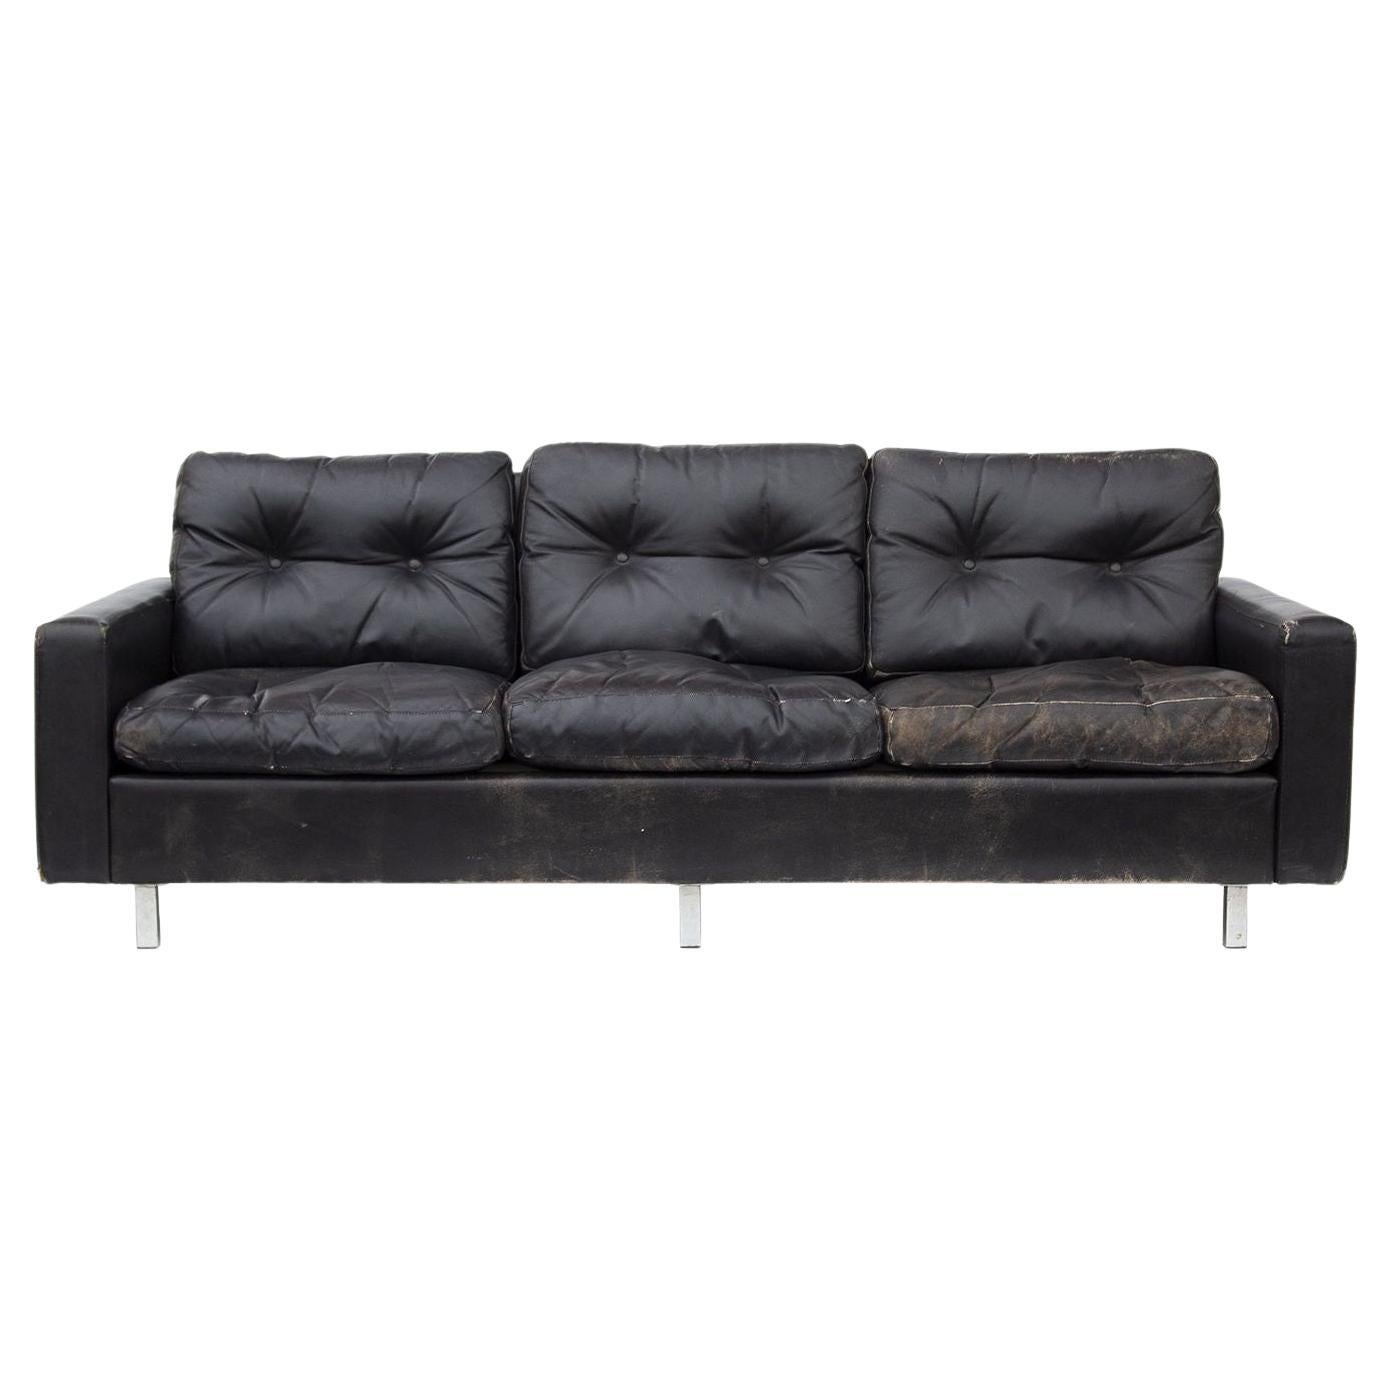 Tufted Black Leather Sofa, Imported from Europe in the '60s For Sale